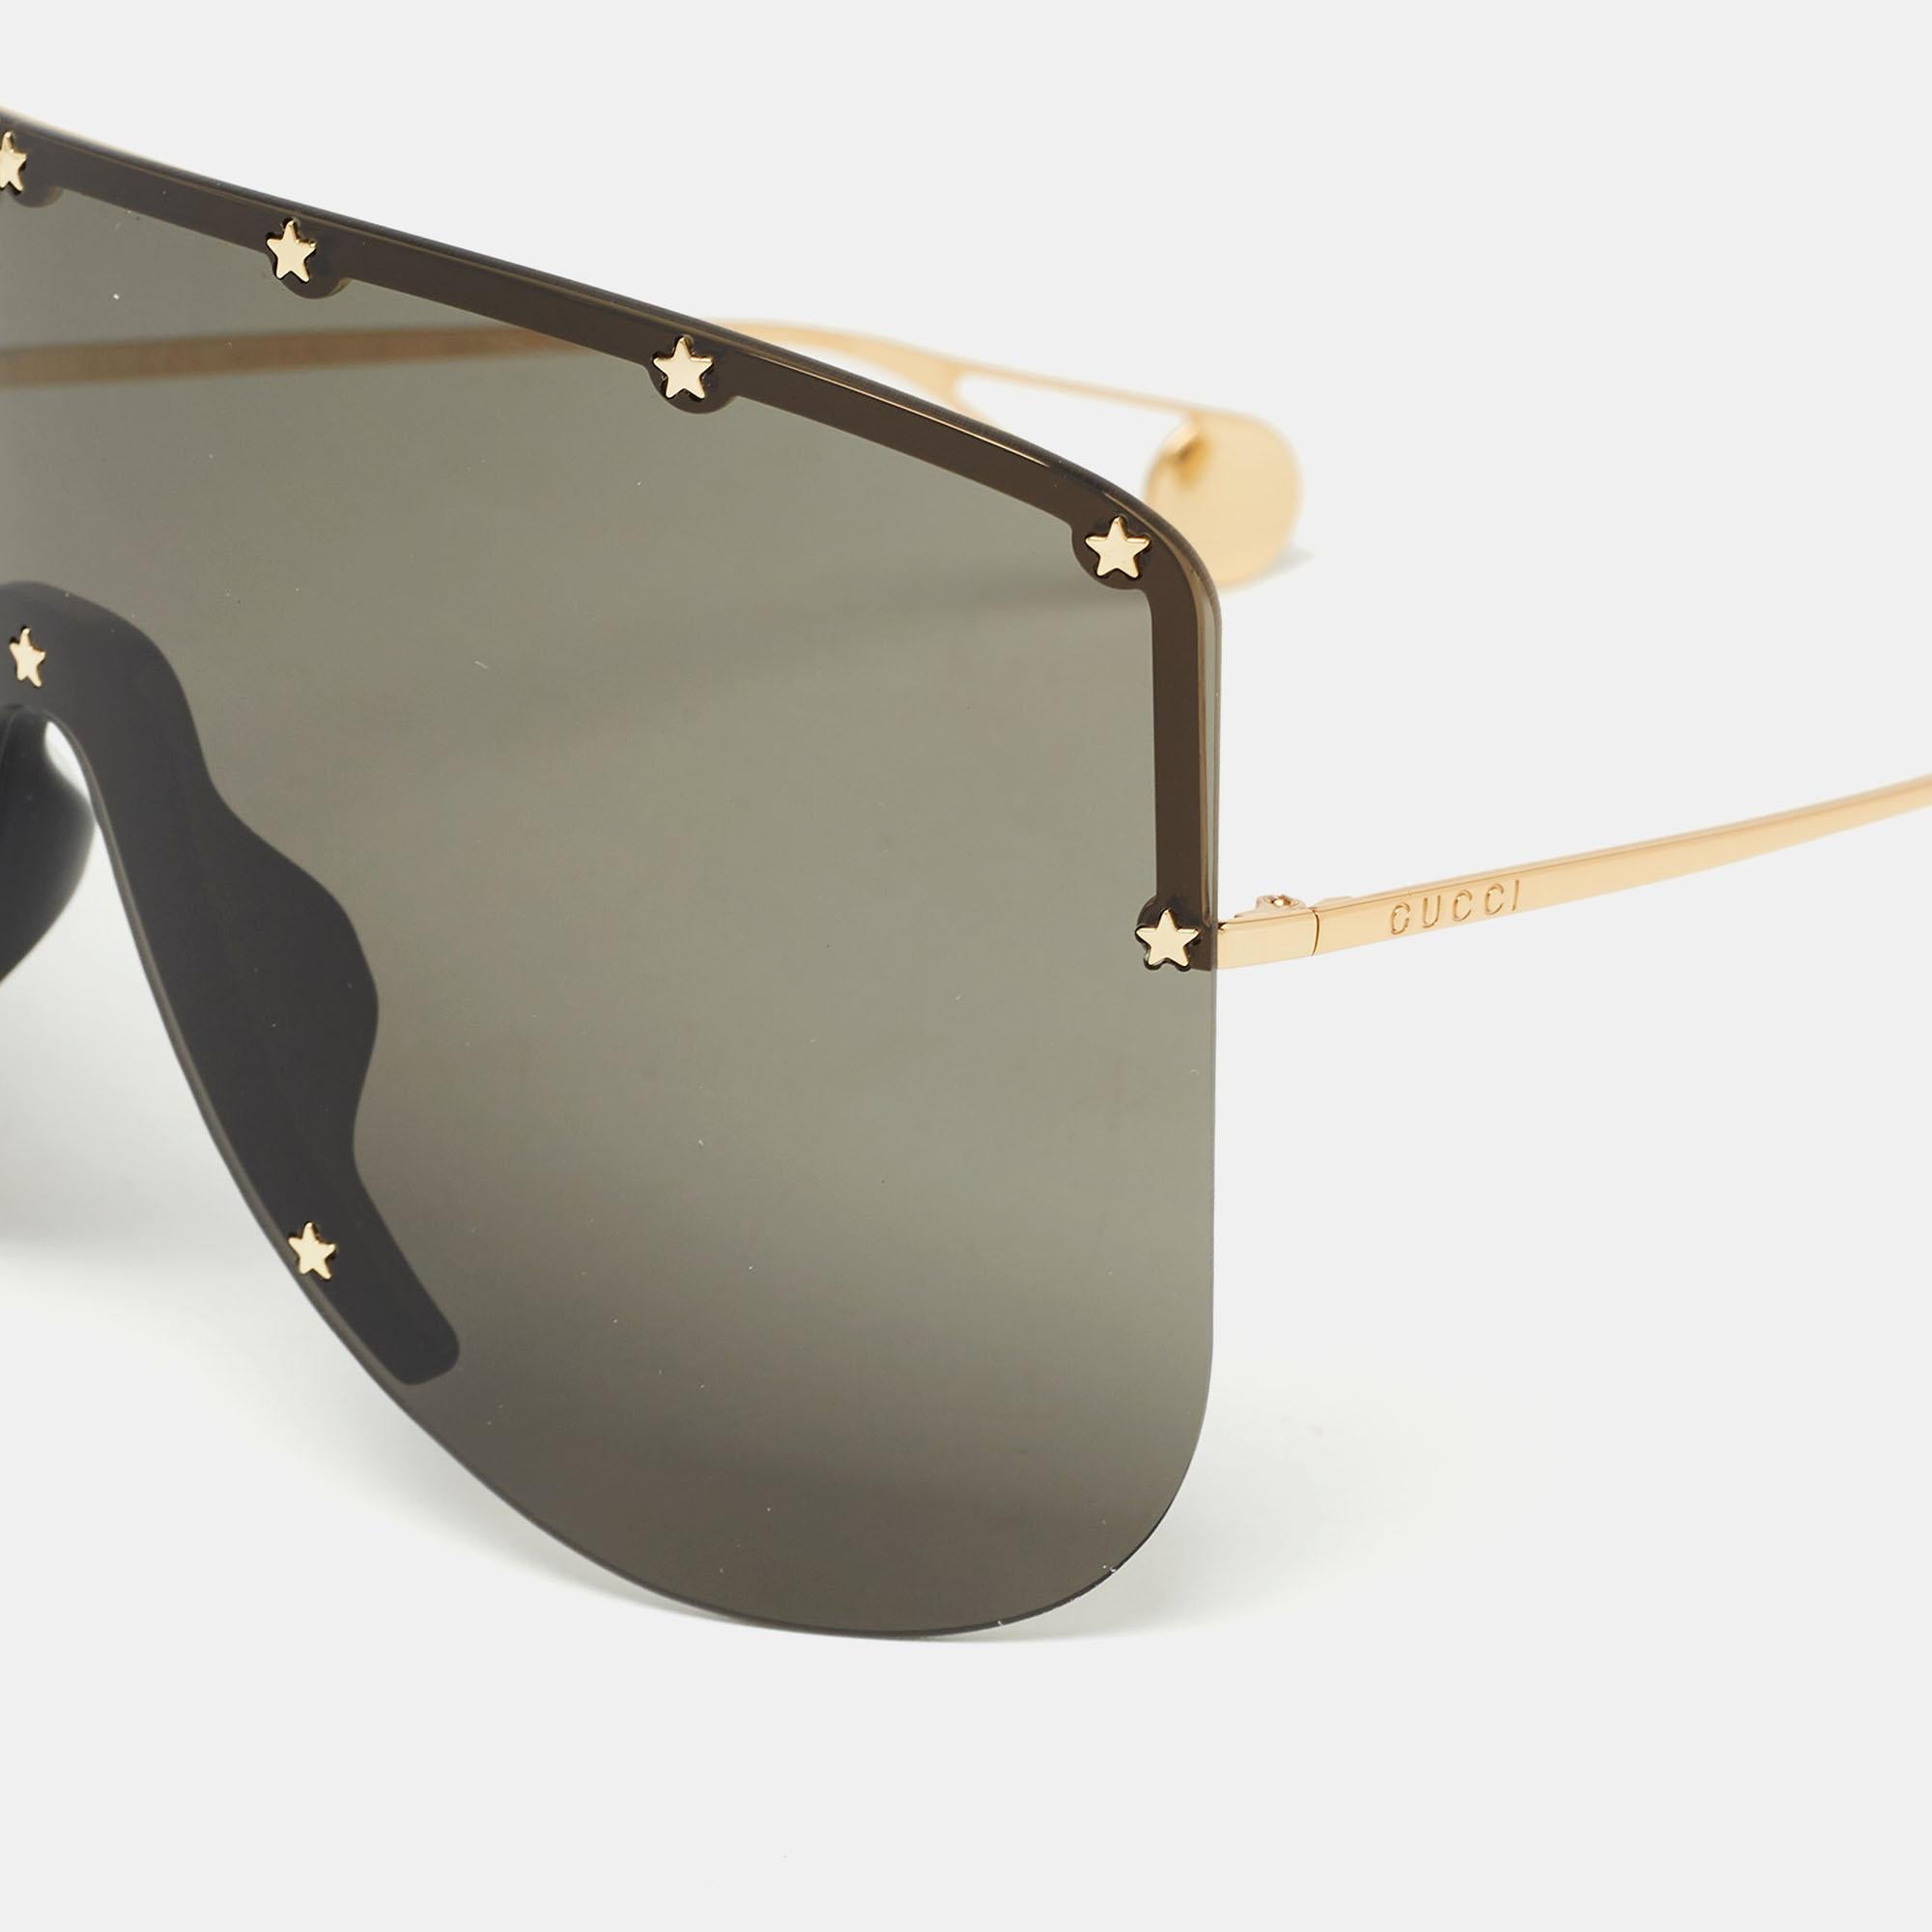 Enjoy those sunny days in full style while keeping your eyes safe with these Gucci sunglasses. The pair has a shield frame fitted with high-quality lenses and embellishments.

Includes
Info Booklet, Original Case, Original Dust Cloth